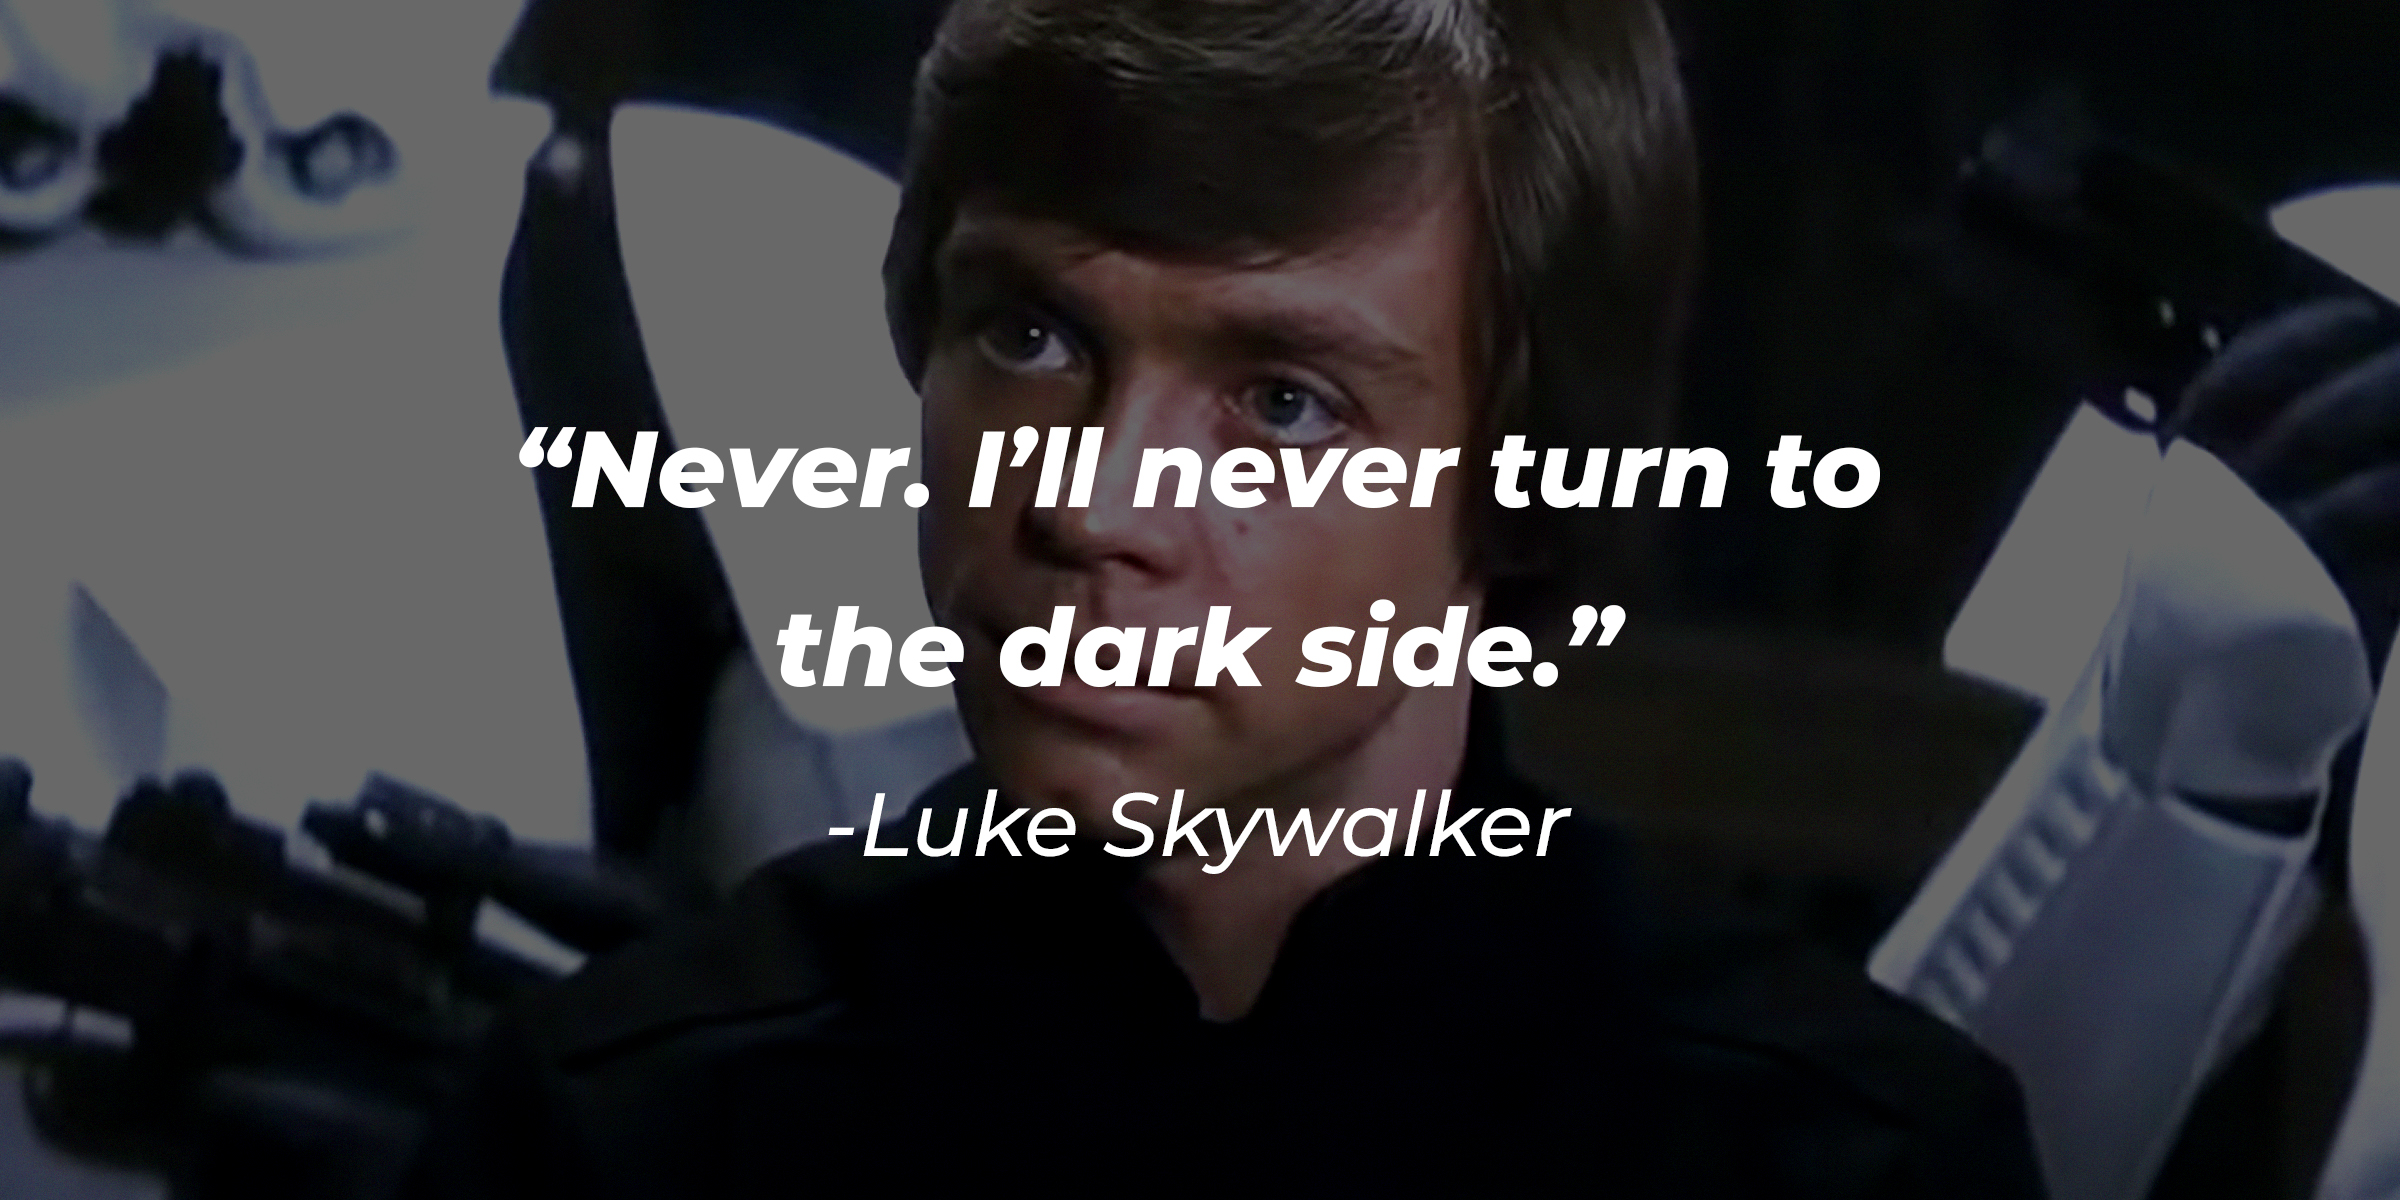 Luke Skywalker, with his quote: “Never. I’ll never turn to the dark side.” | Source: Facebook.com/StarWars